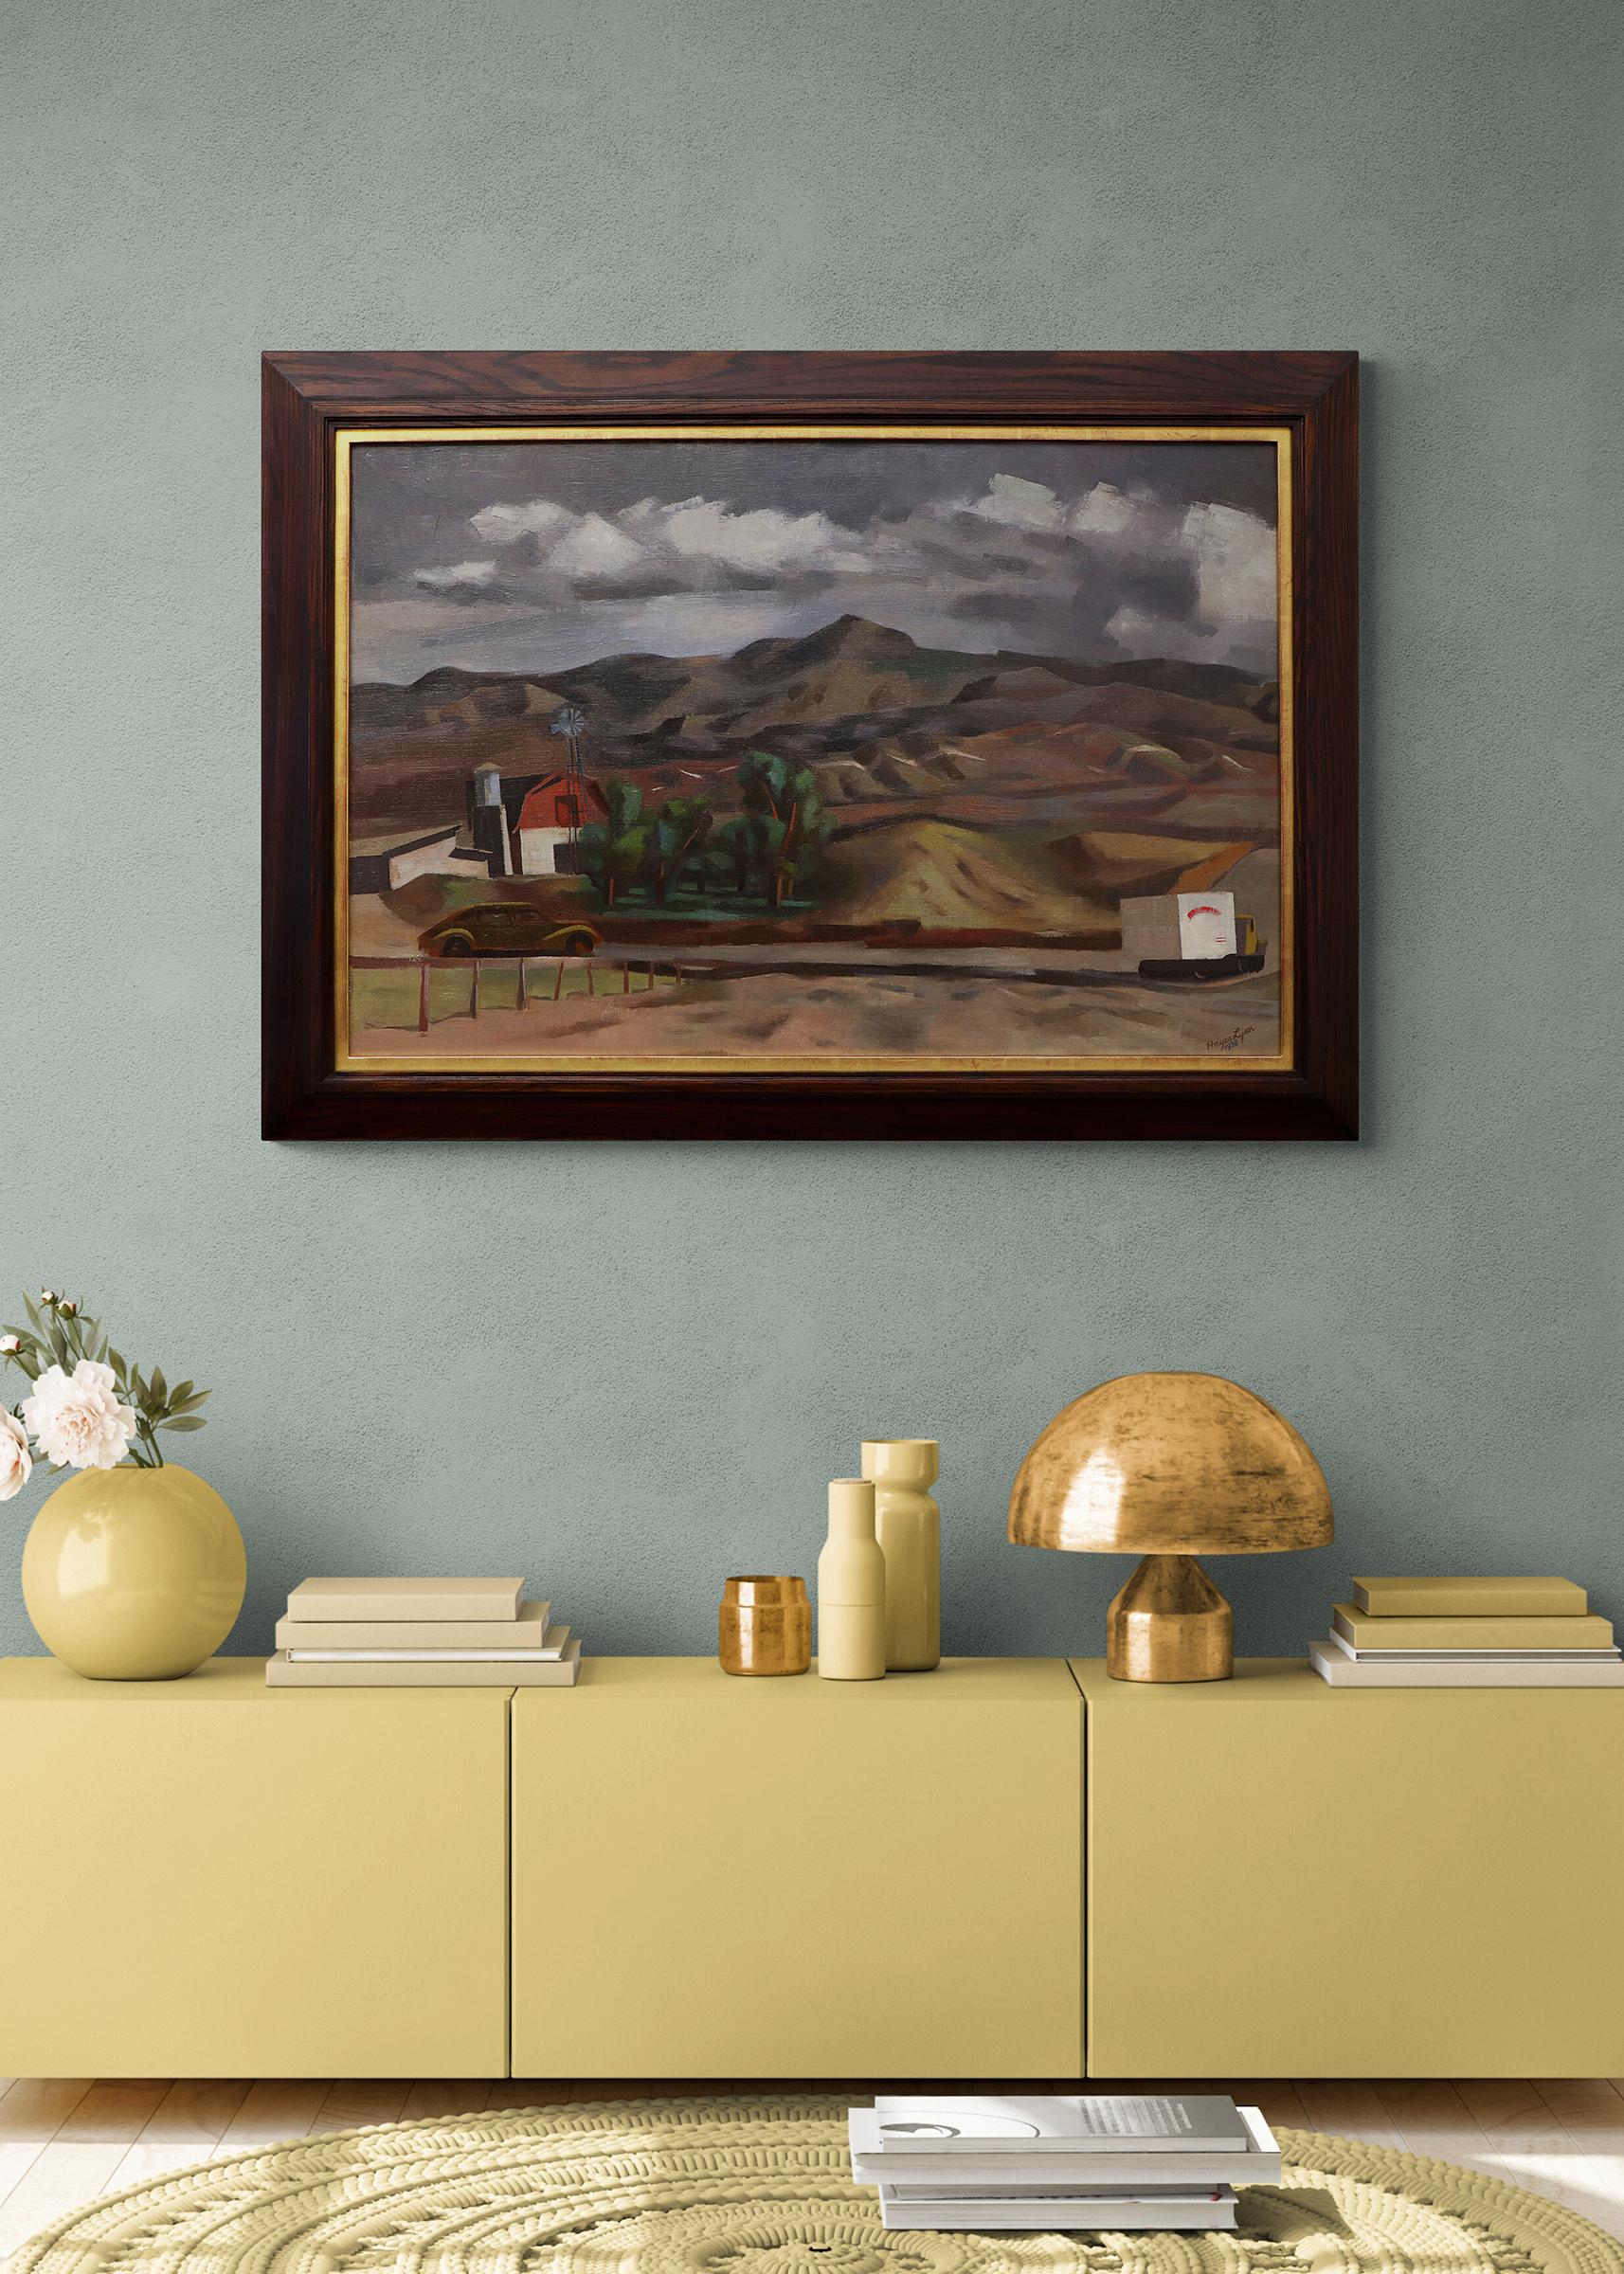 The Hillside, Colorado, 1930s Landscape Oil Painting, Hillside Farm with Truck For Sale 11